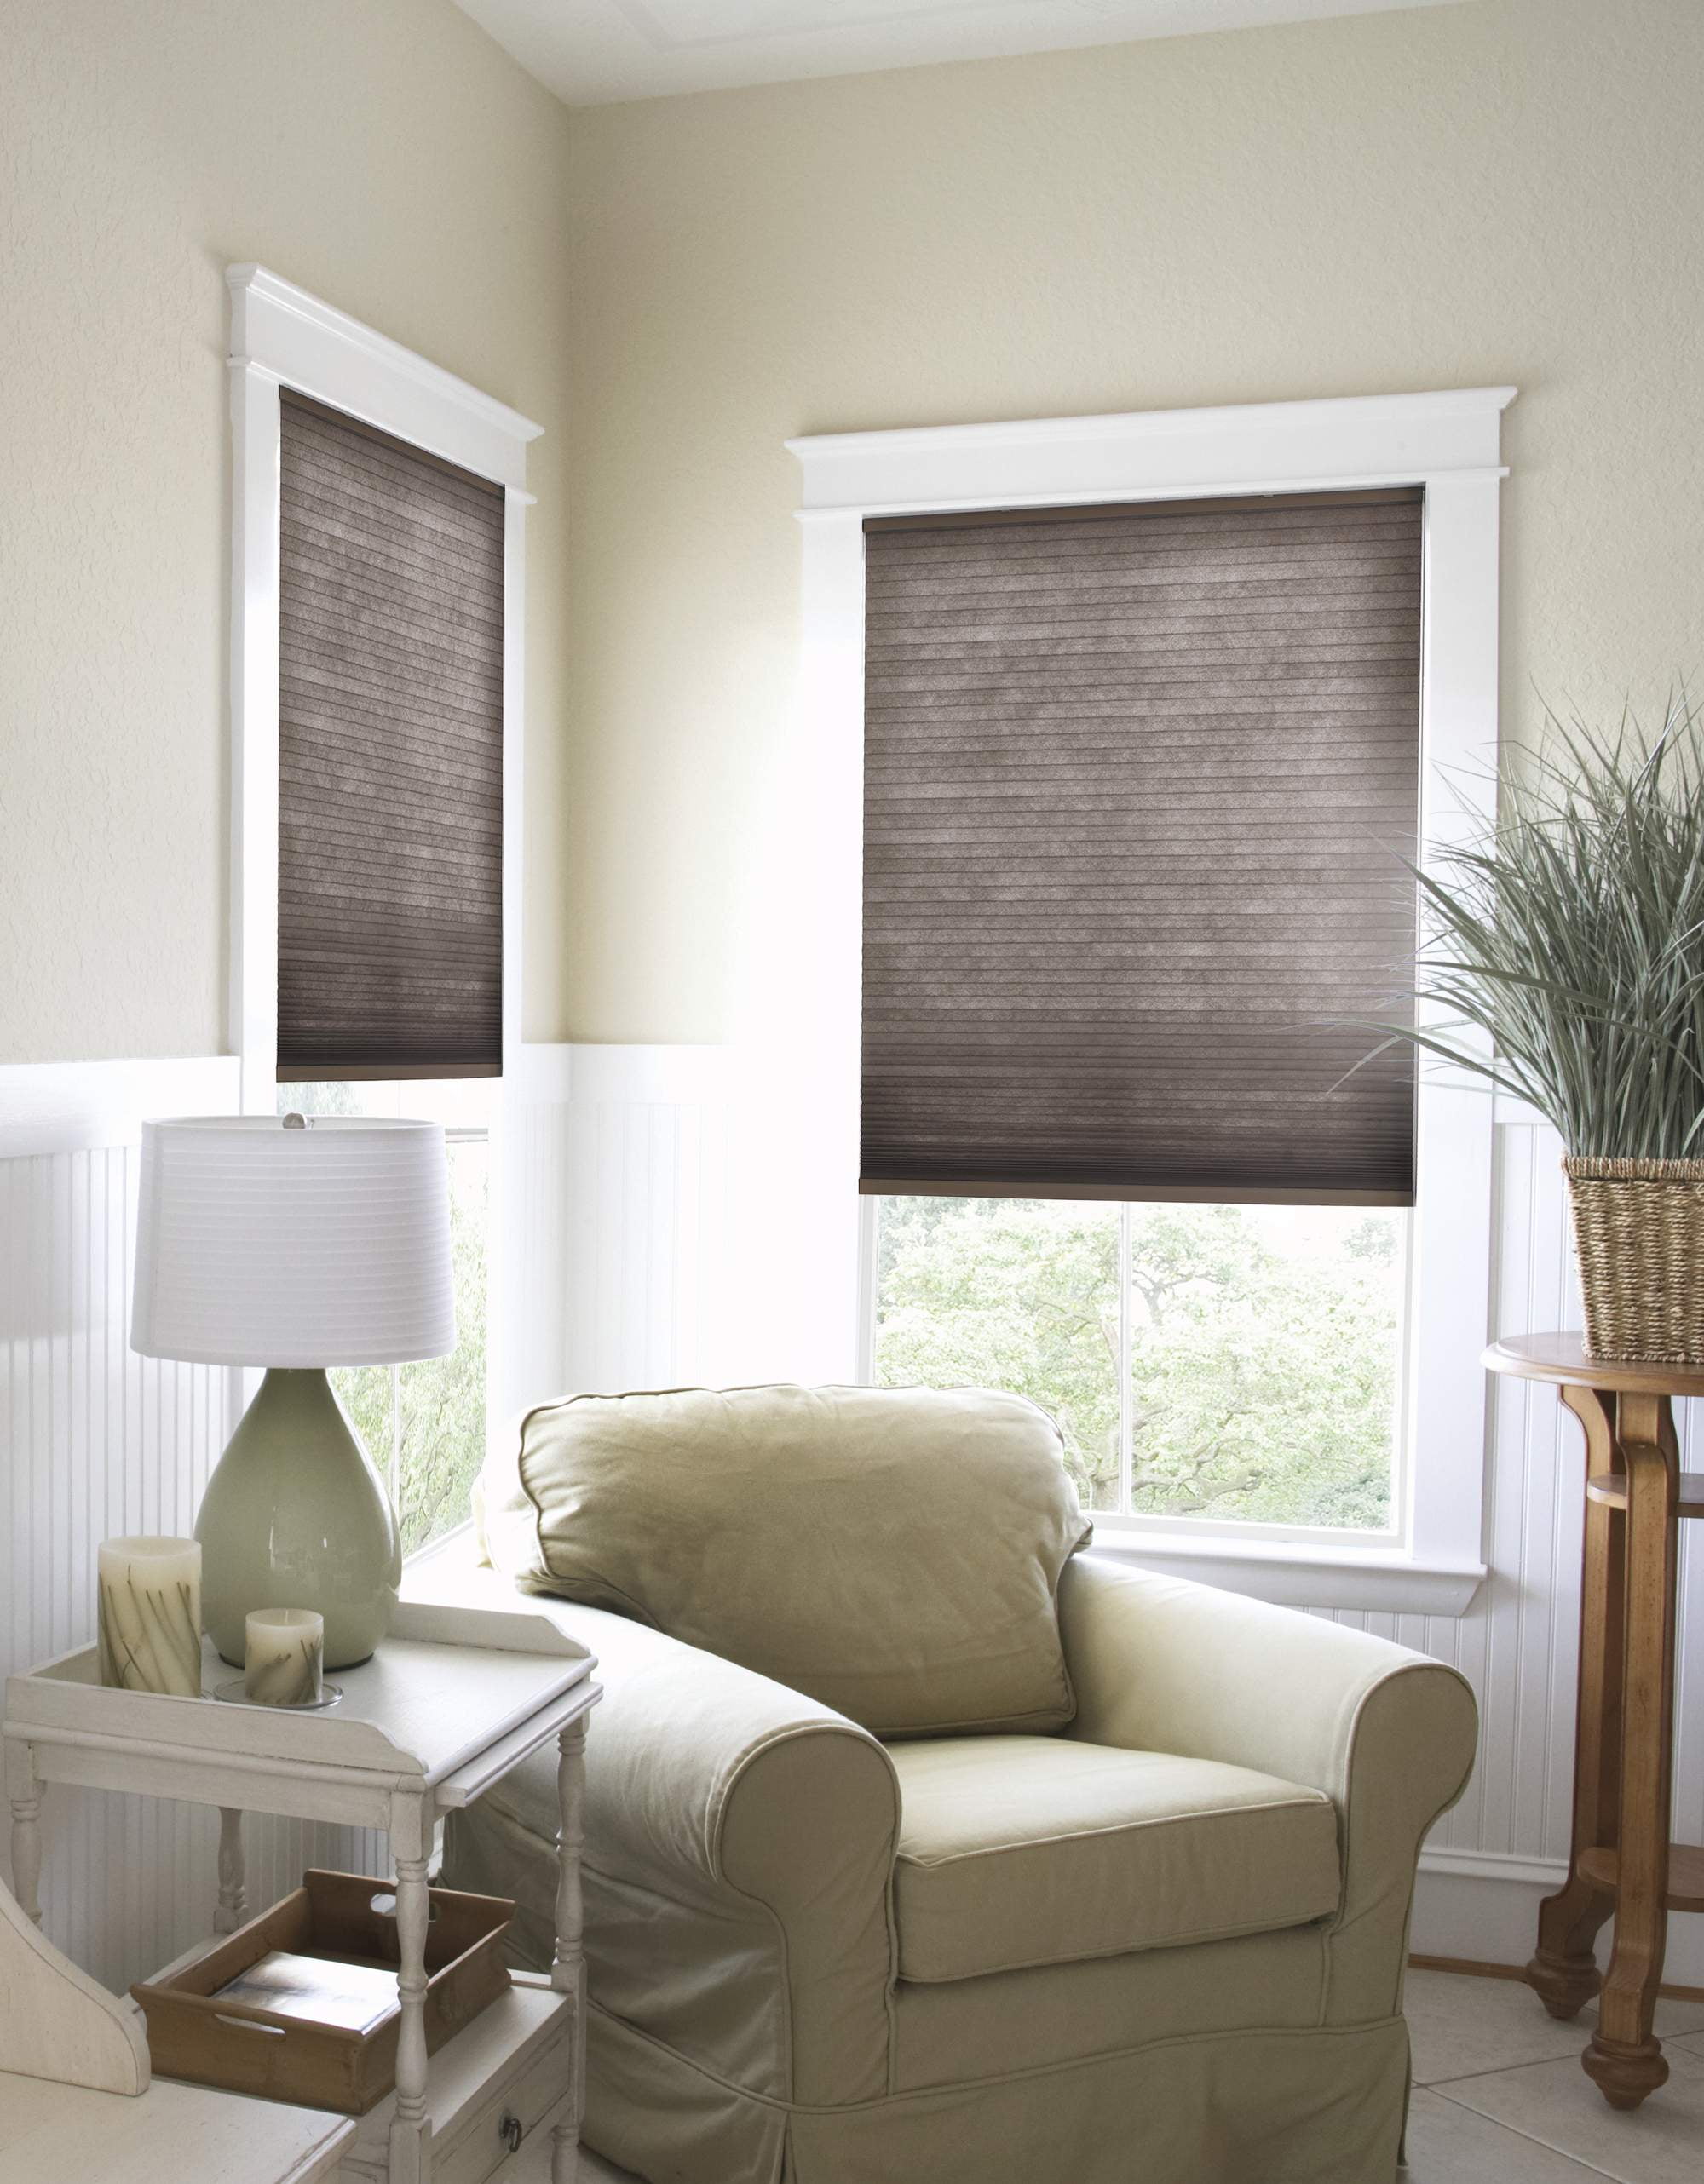 Coffee Privacy Light Filtering Cordless Cellular Shades Window Blind 36" W 48" H 